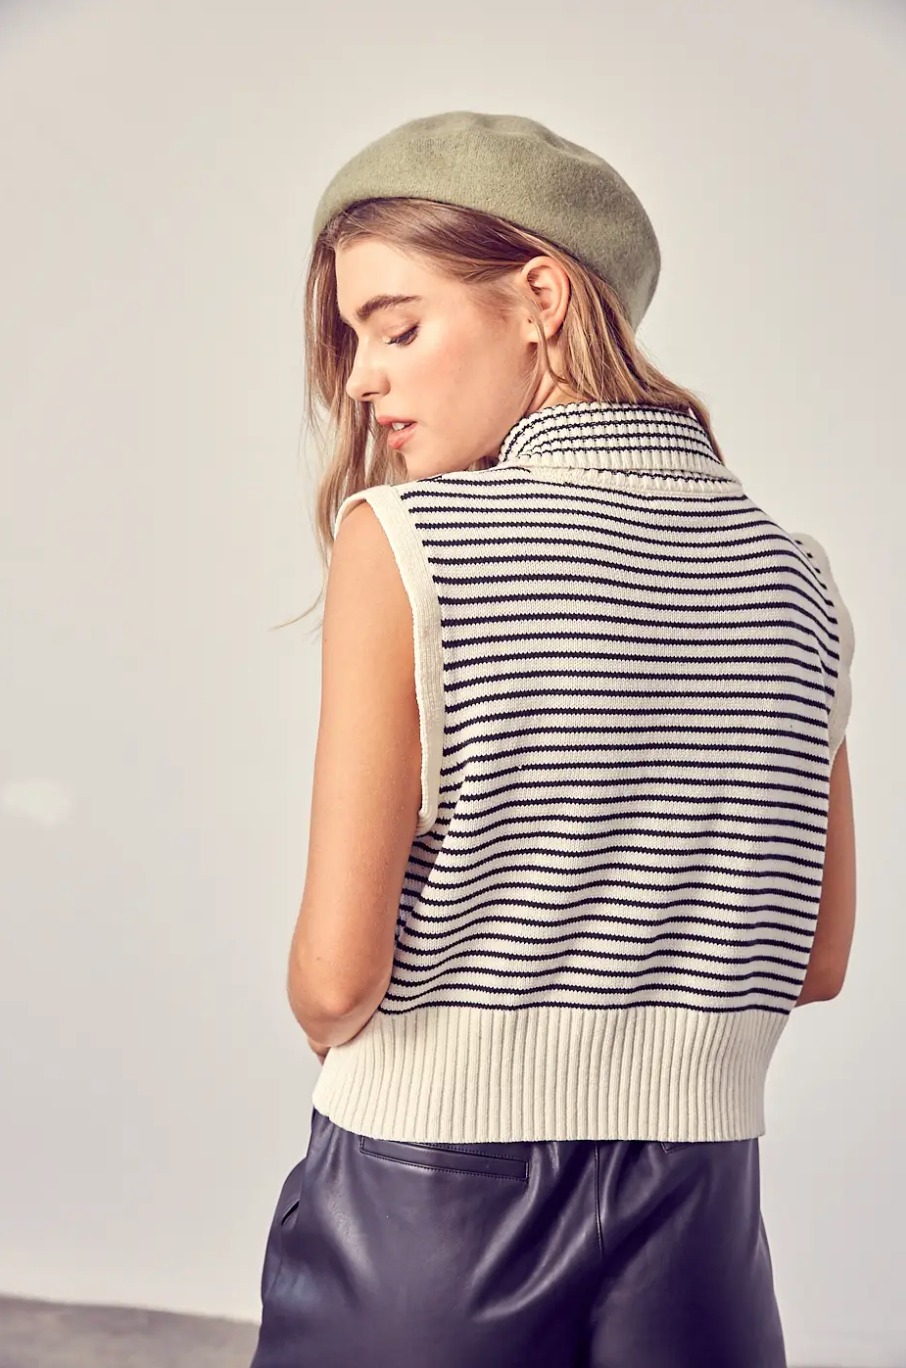 Stripped Sweater Vest by Urban Luxe Lifestyles